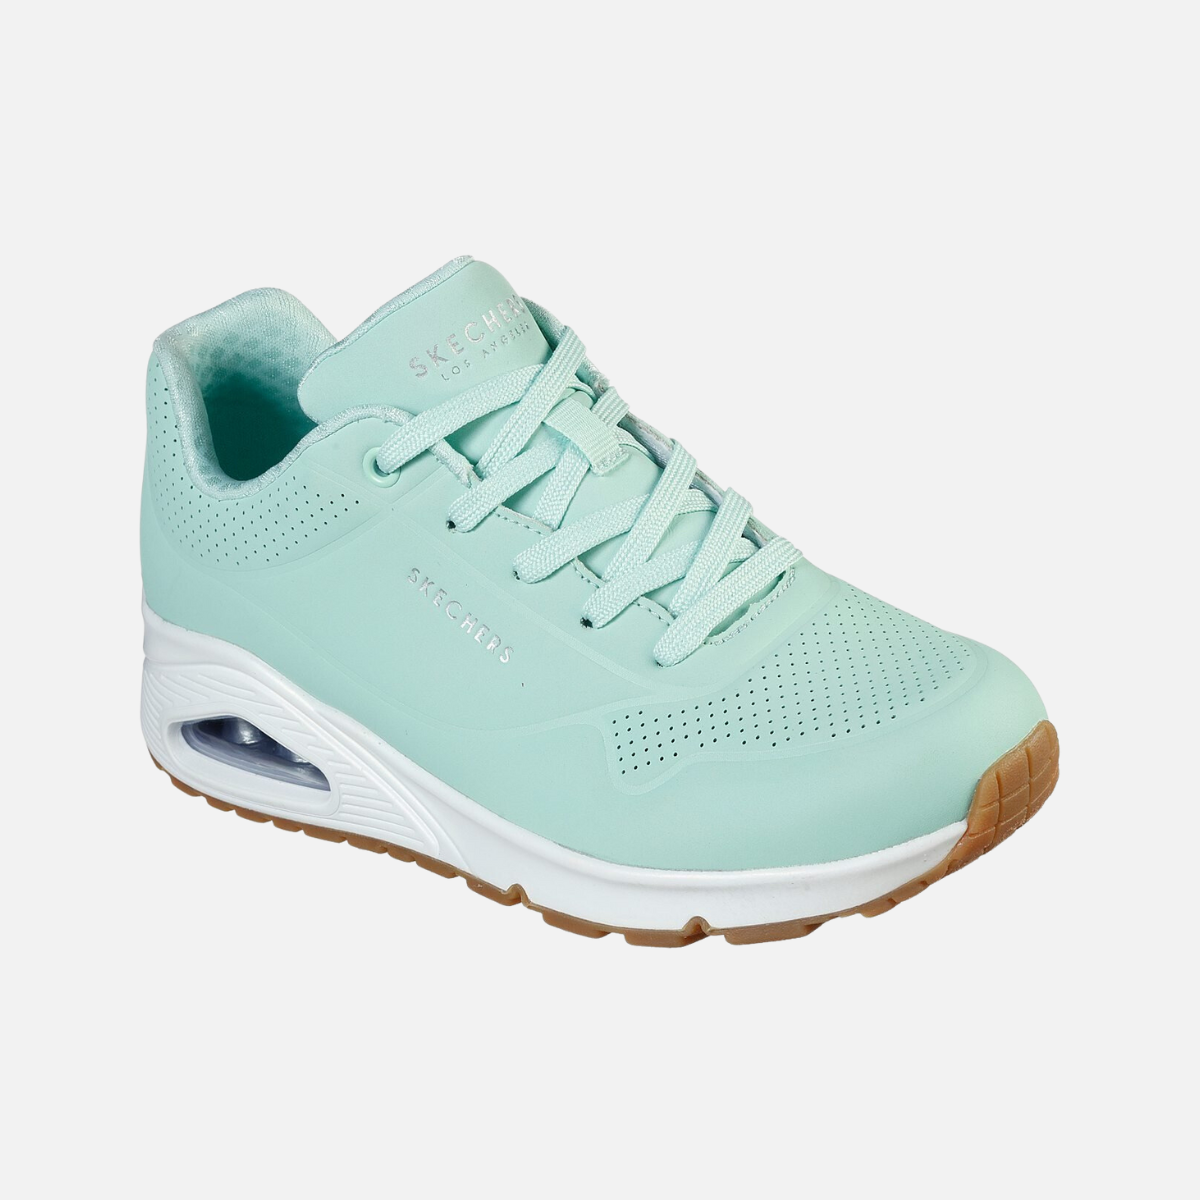 Skechers Uno - Stand On Air Womens Shoes -Mint